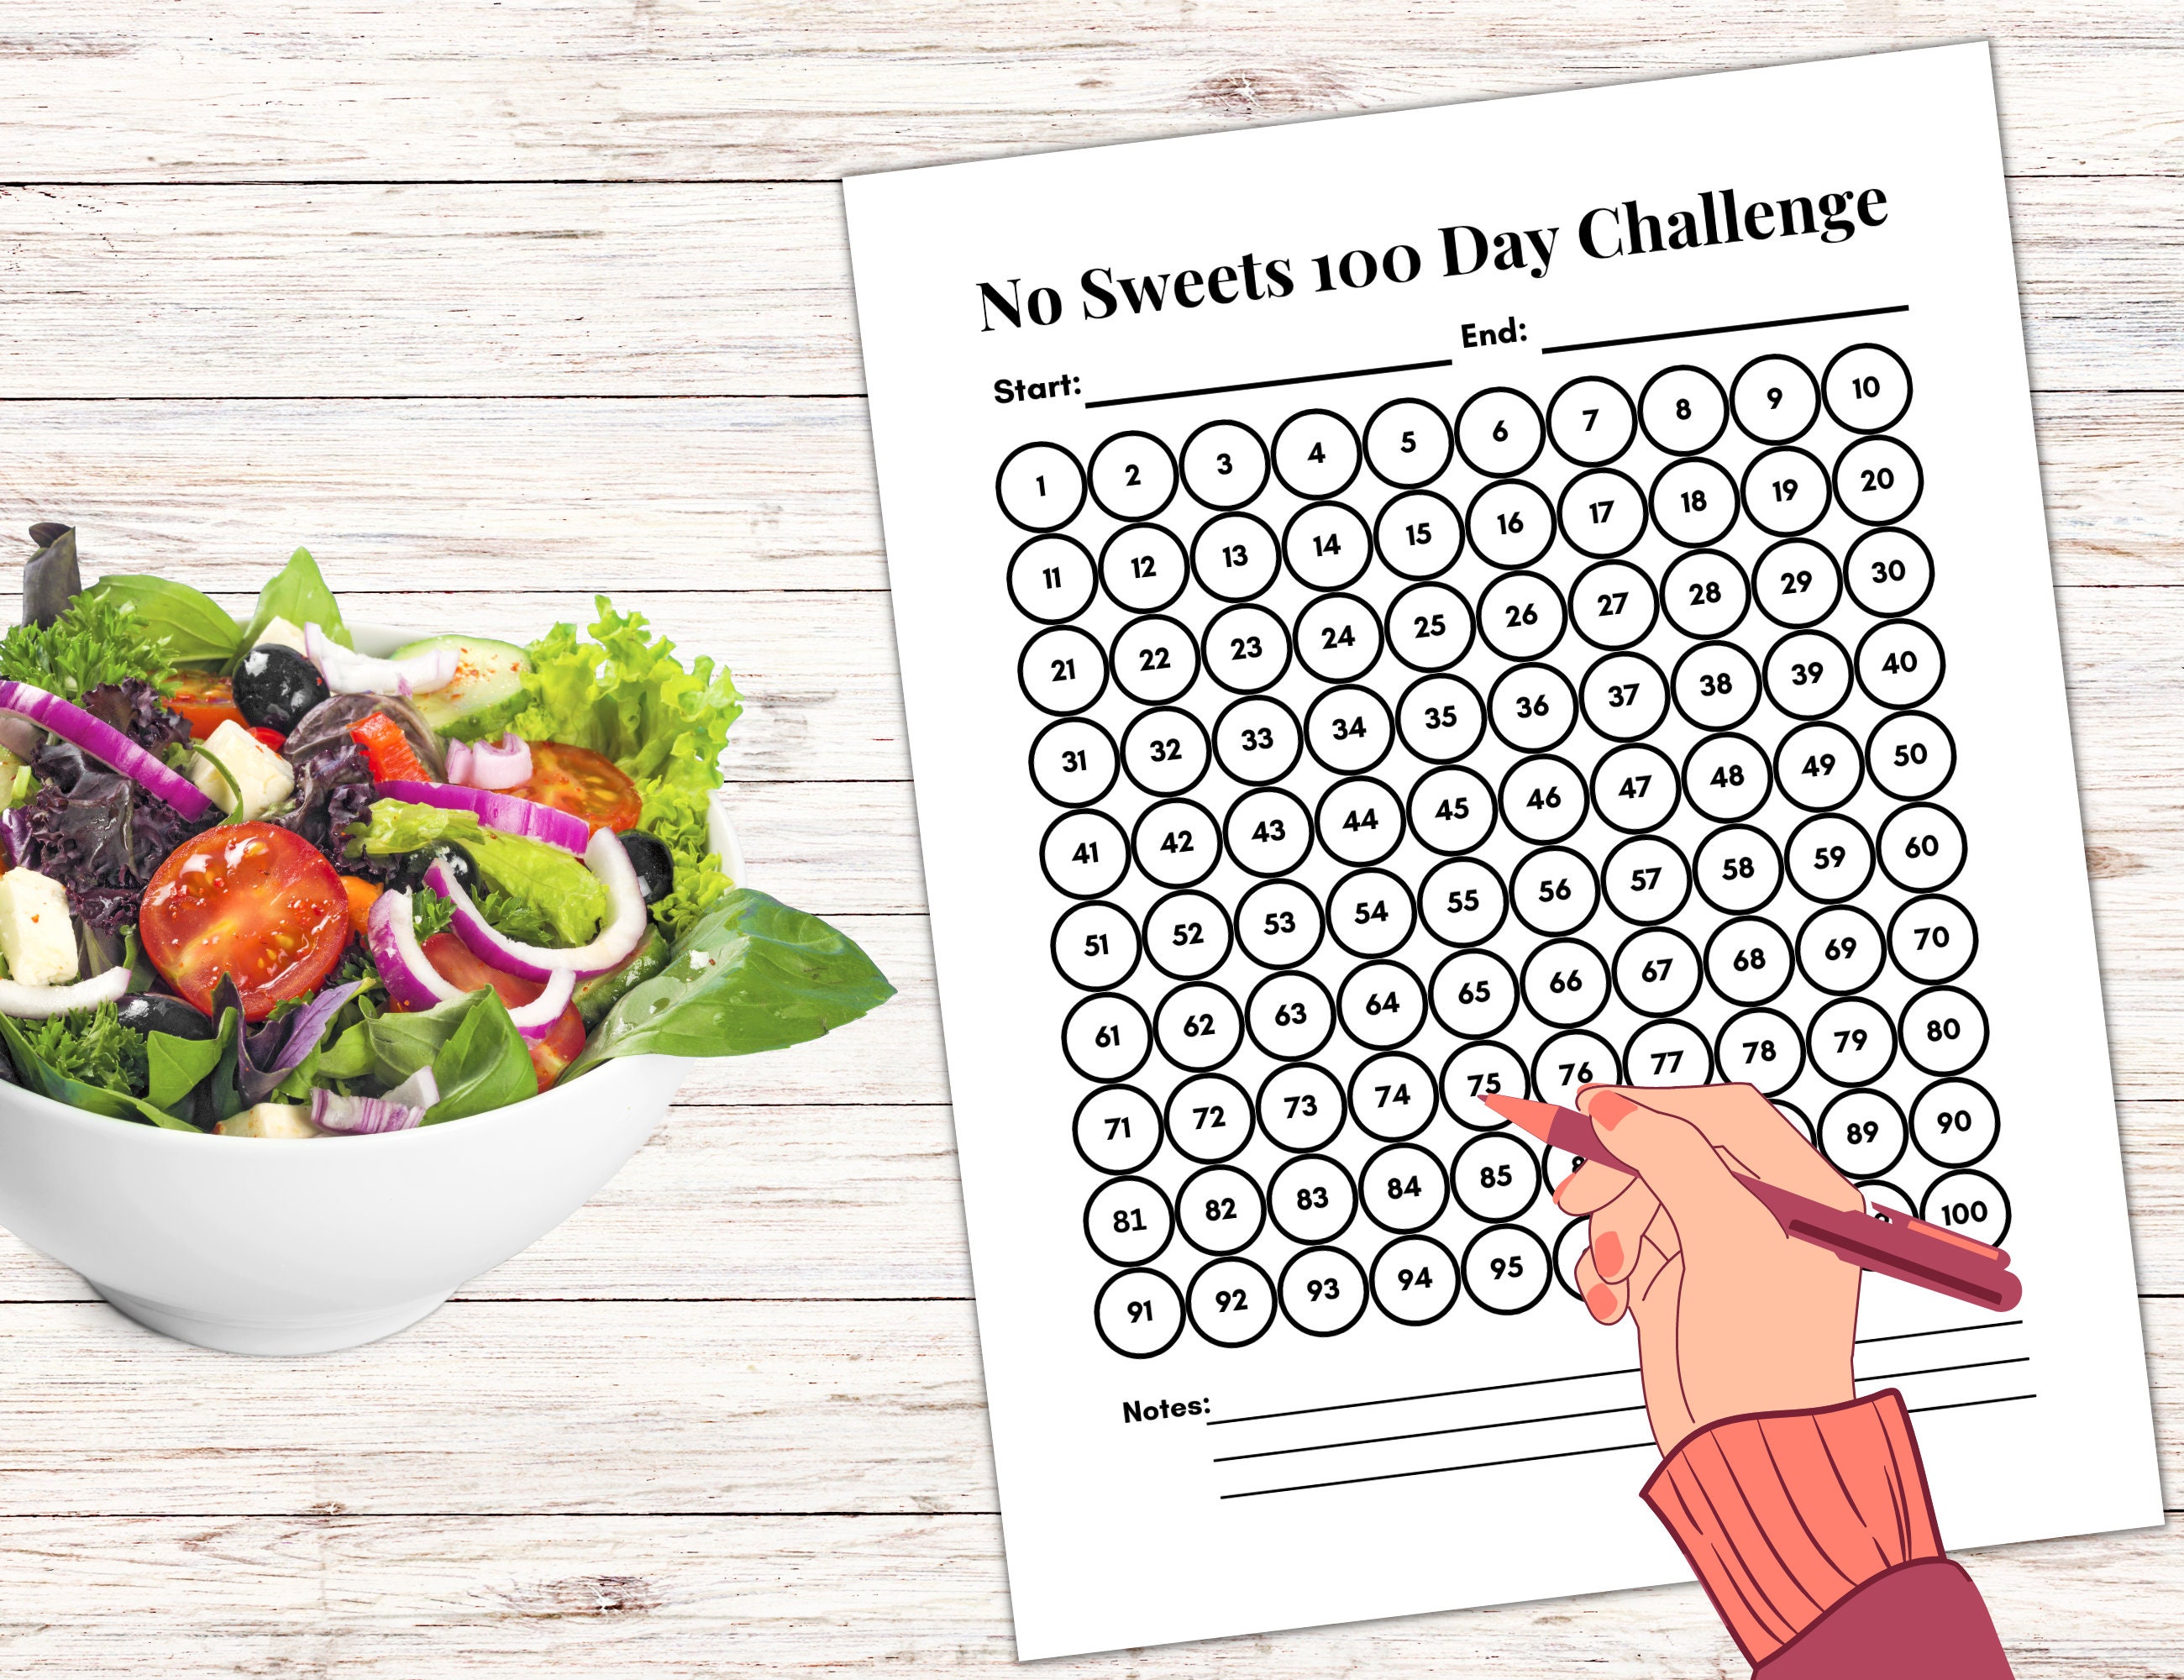 Have You Taken the Canderel Sugarly Challenge?